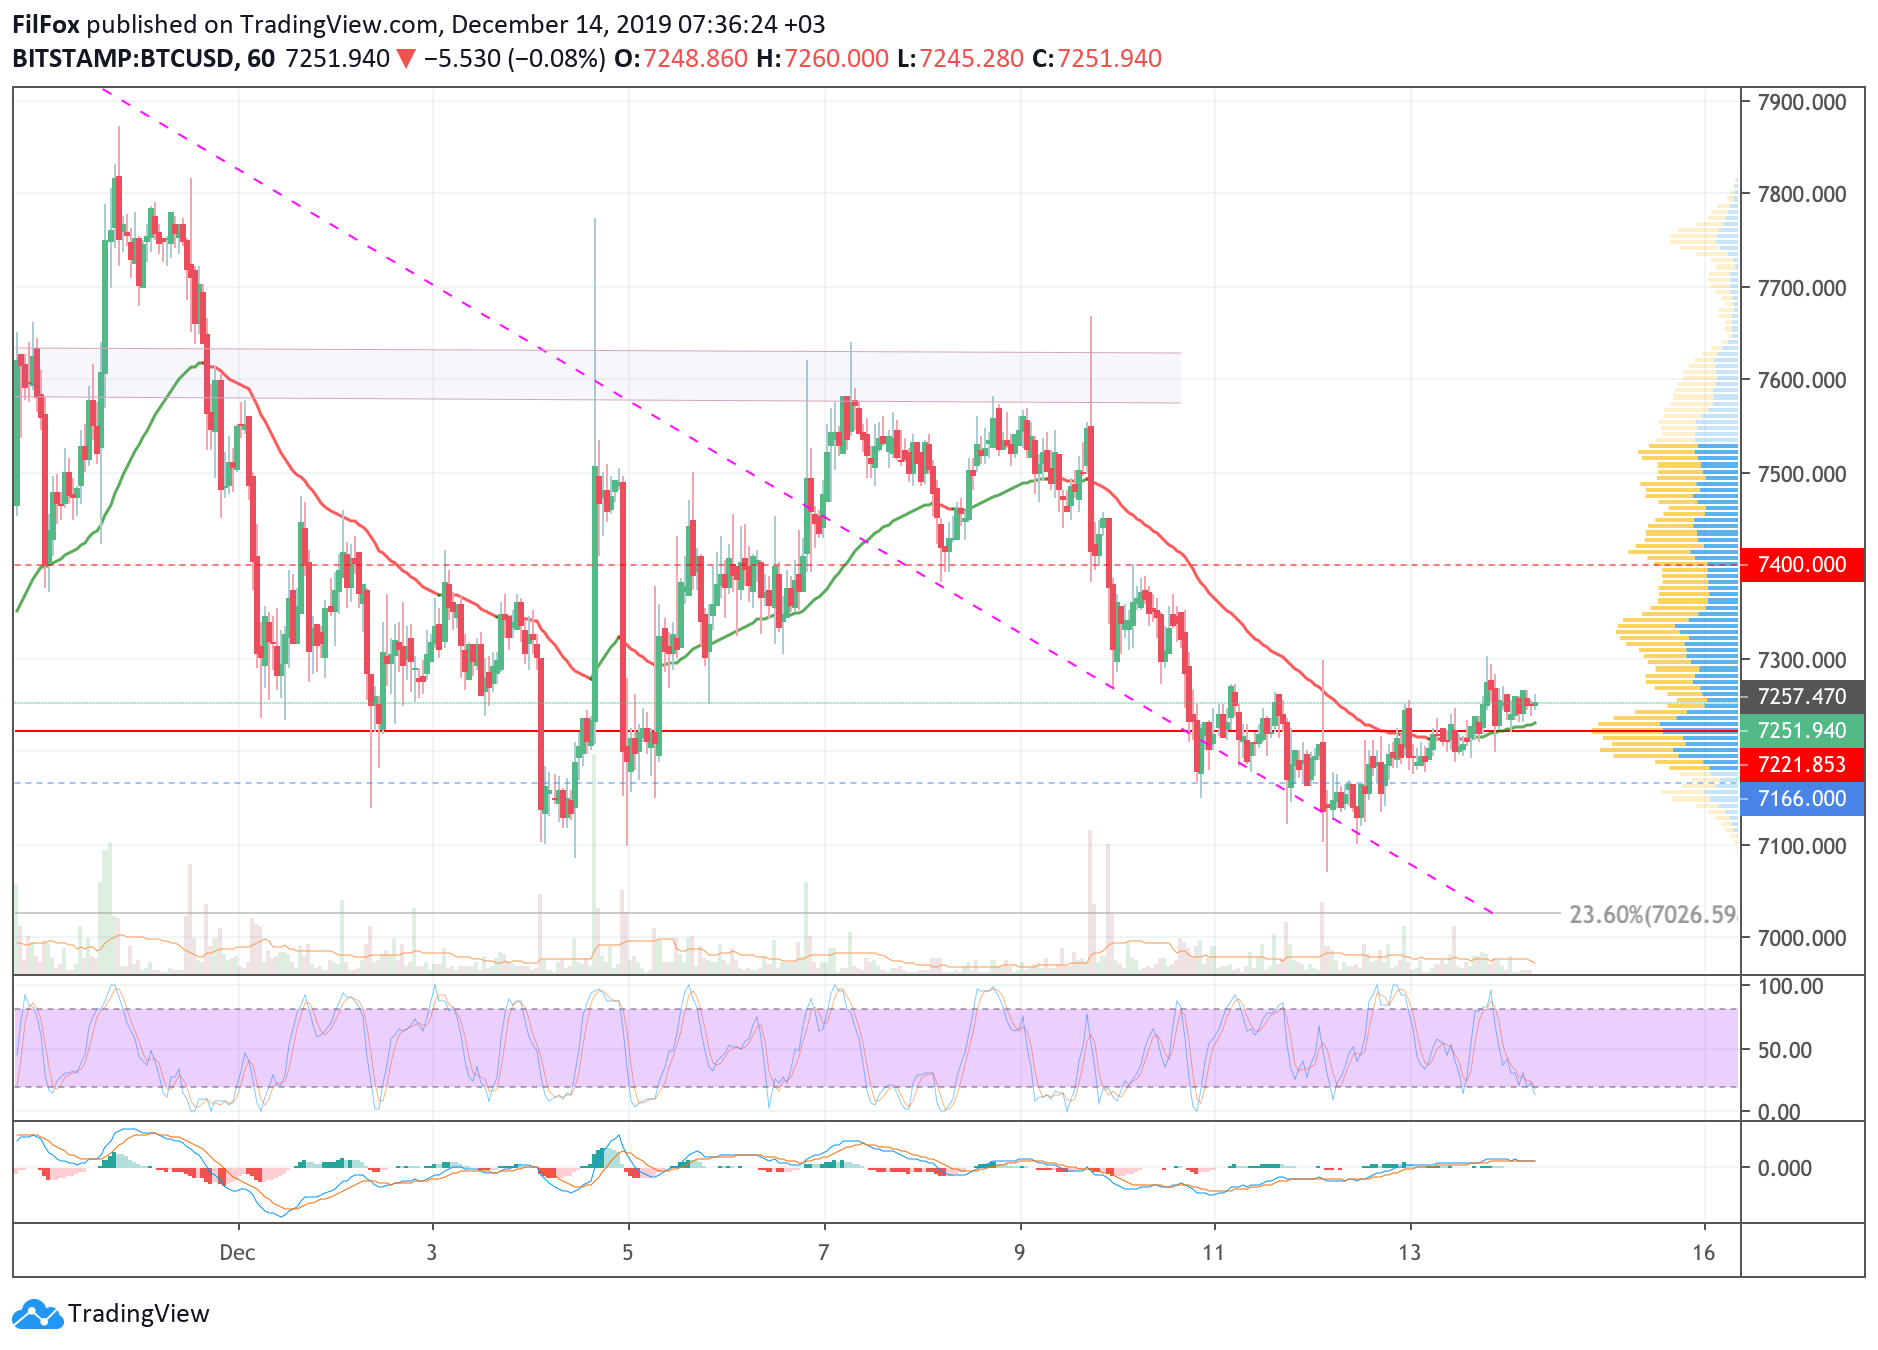 Analysis of cryptocurrency pairs BTC / USD, ETH / USD and XRP / USD on 12/14/2019